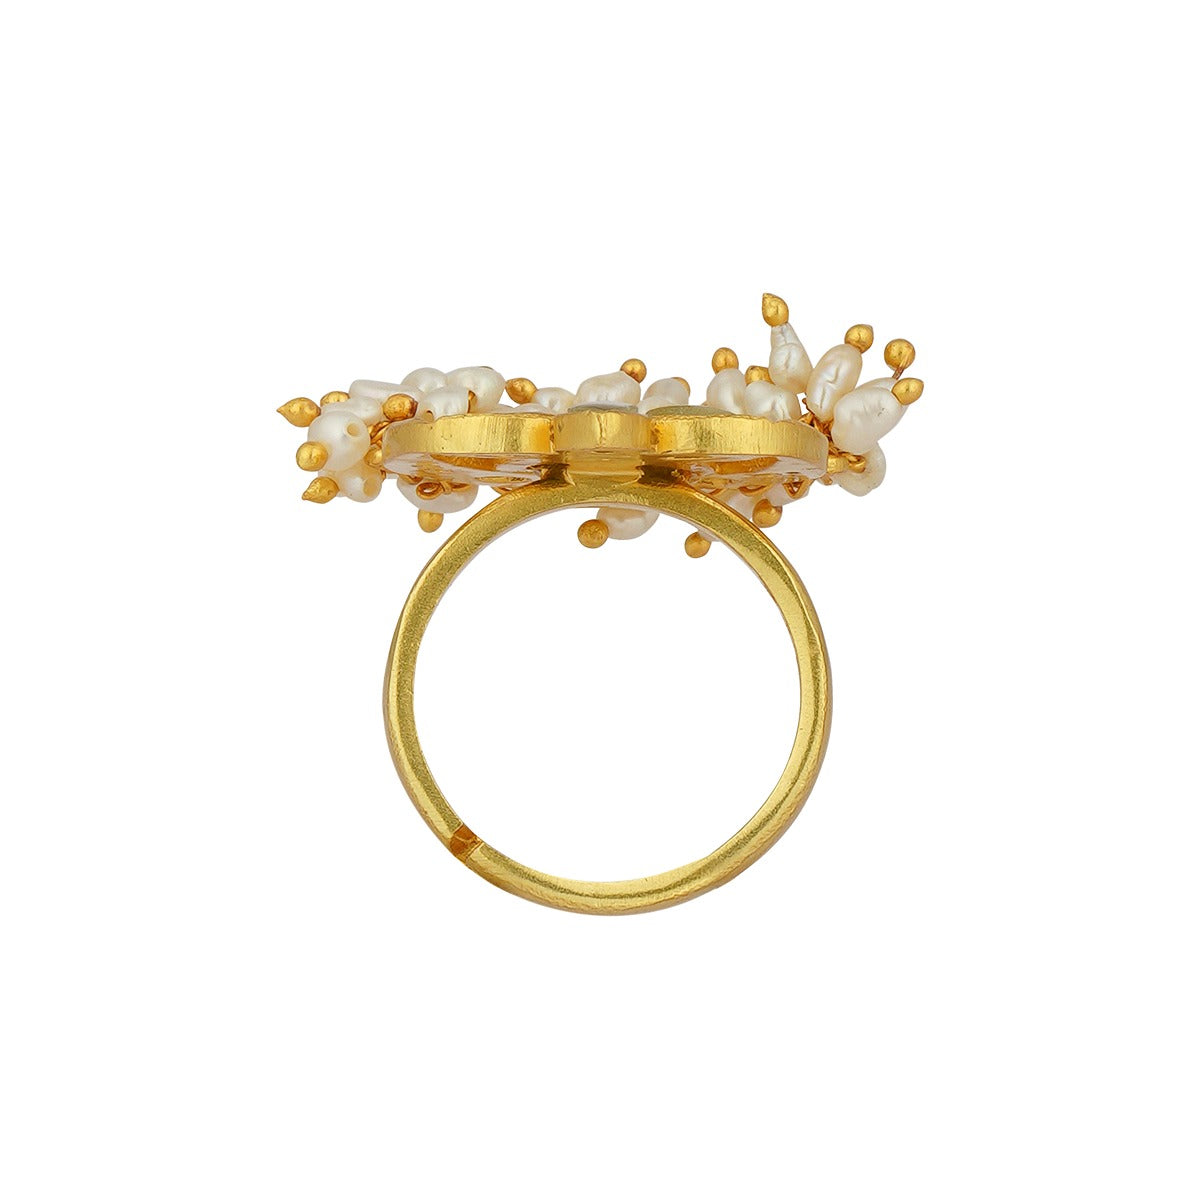 Chaand Phool Ring with Mirror Polki and Pearls